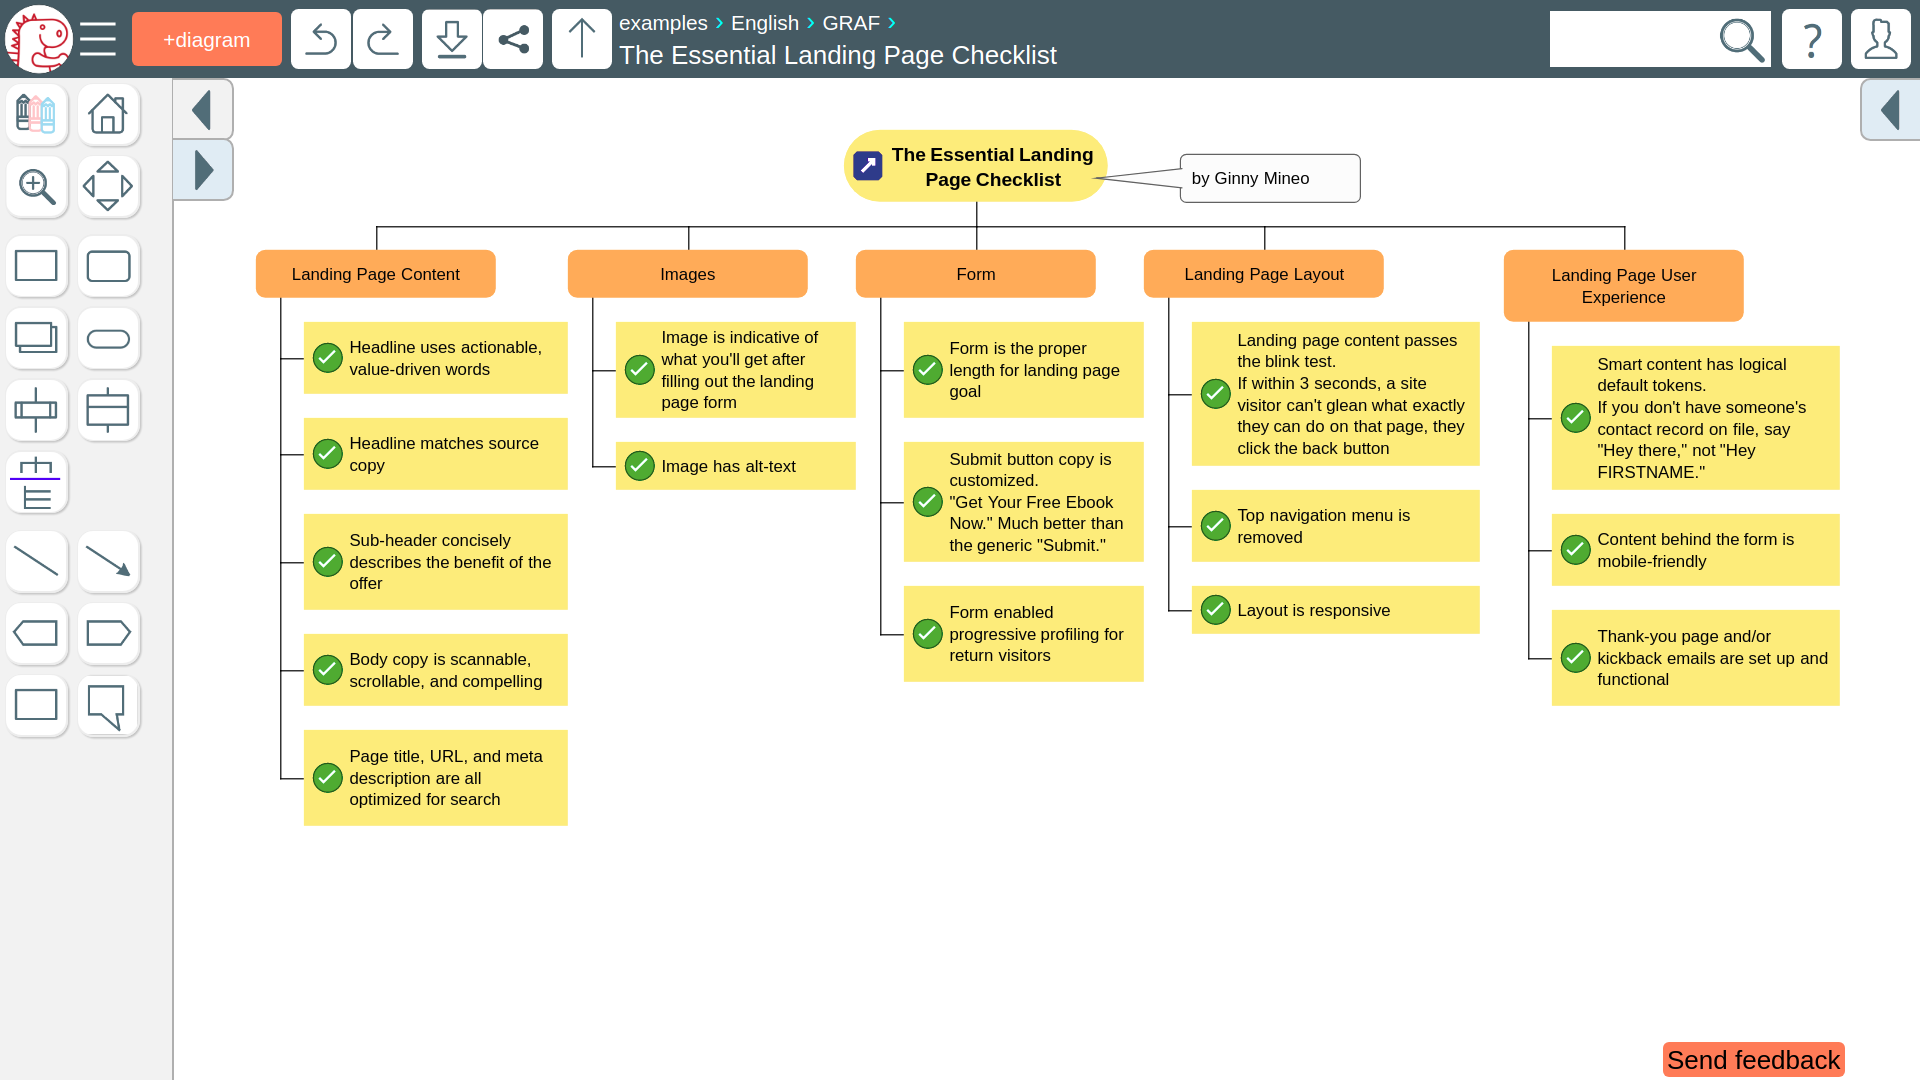 DRAKON Editor Web Software - Ordered mind maps can be created to serve as checklists